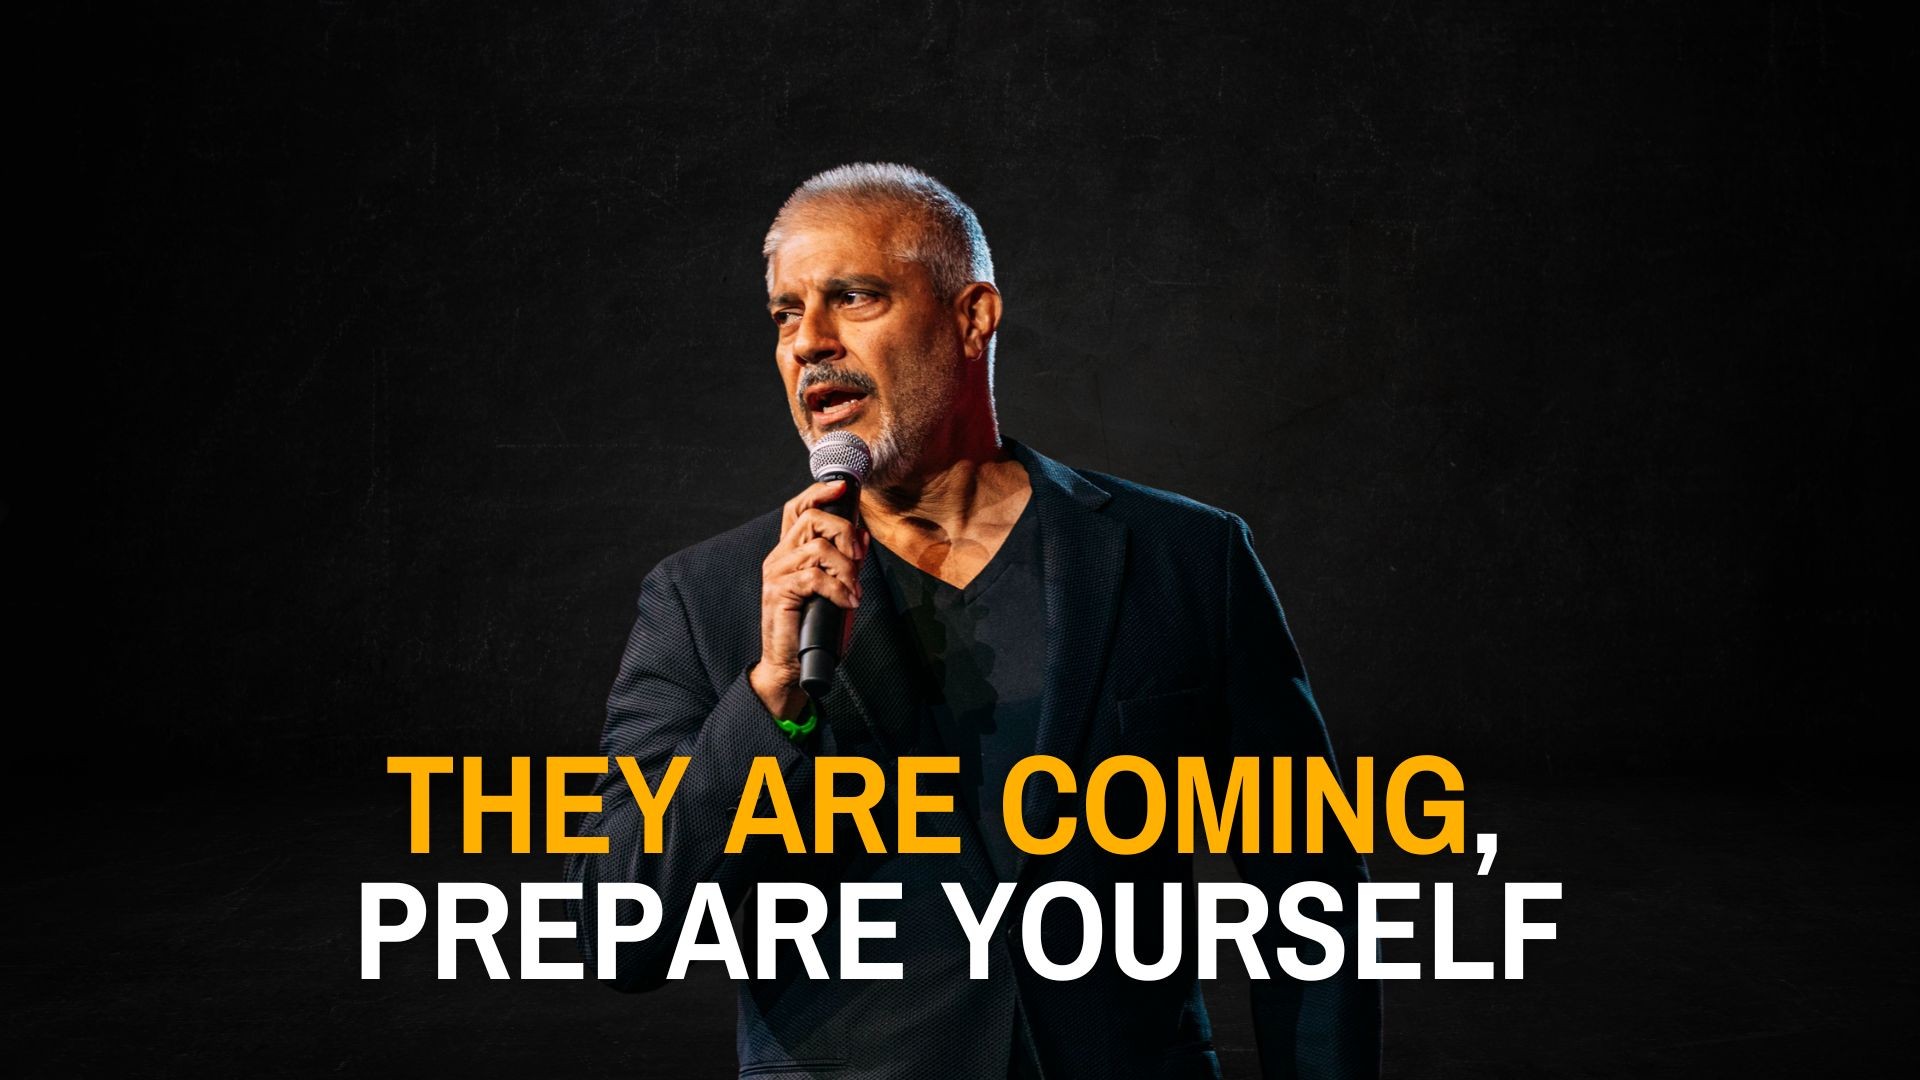 ⁣THEY ARE COMING, Don't Be Afraid. Just Get Prepared! - Dr Rashid A Buttar